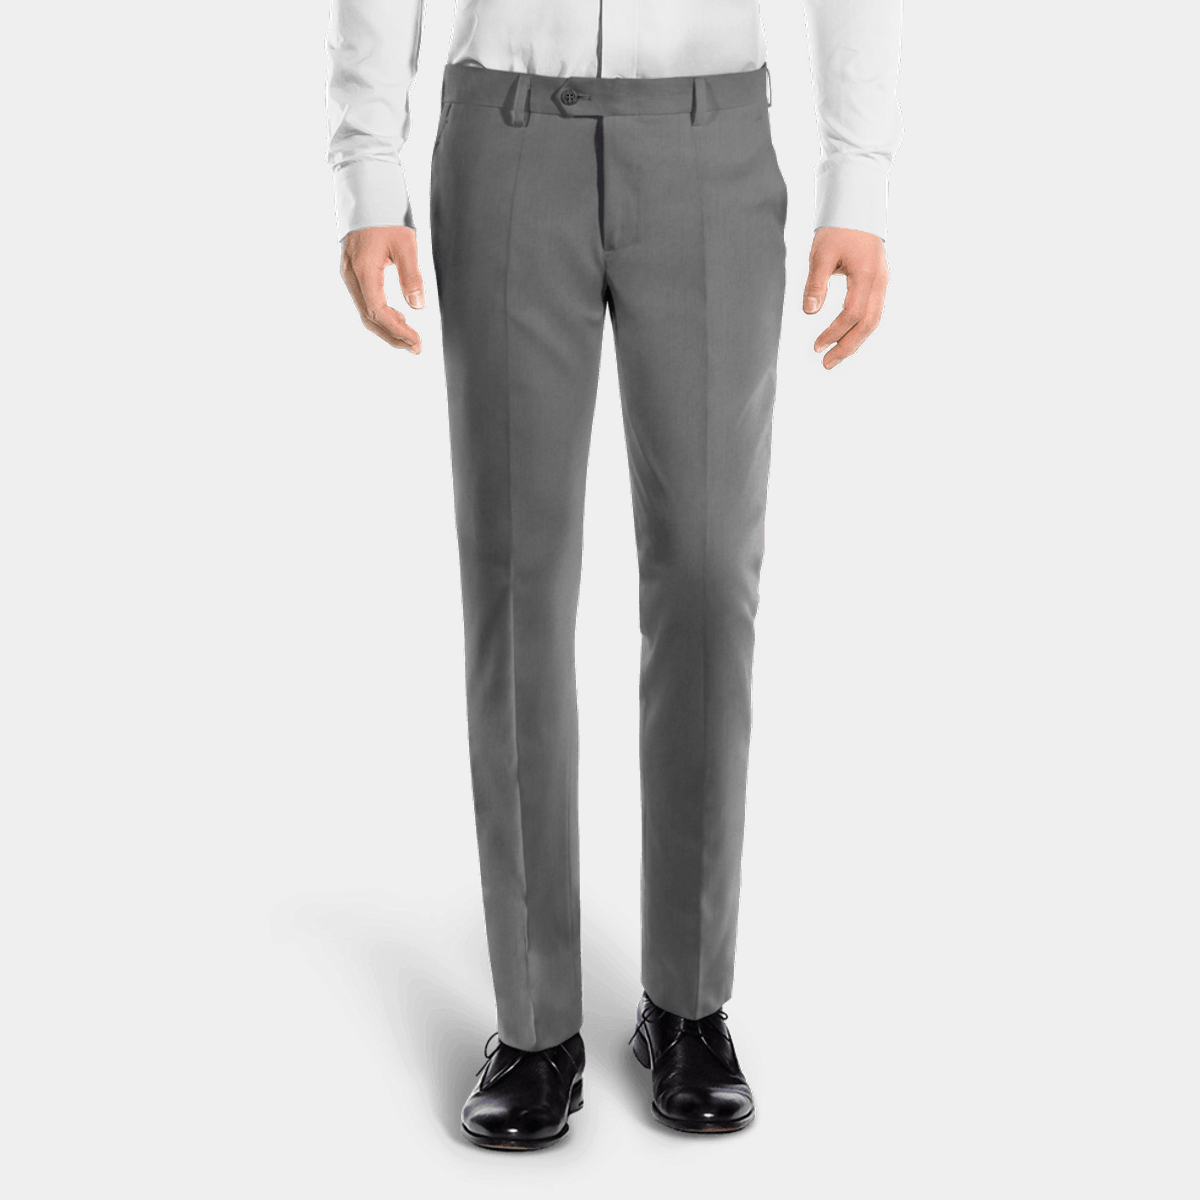 Suit trousers Skinny Fit - Light grey/Checked - Men | H&M IN